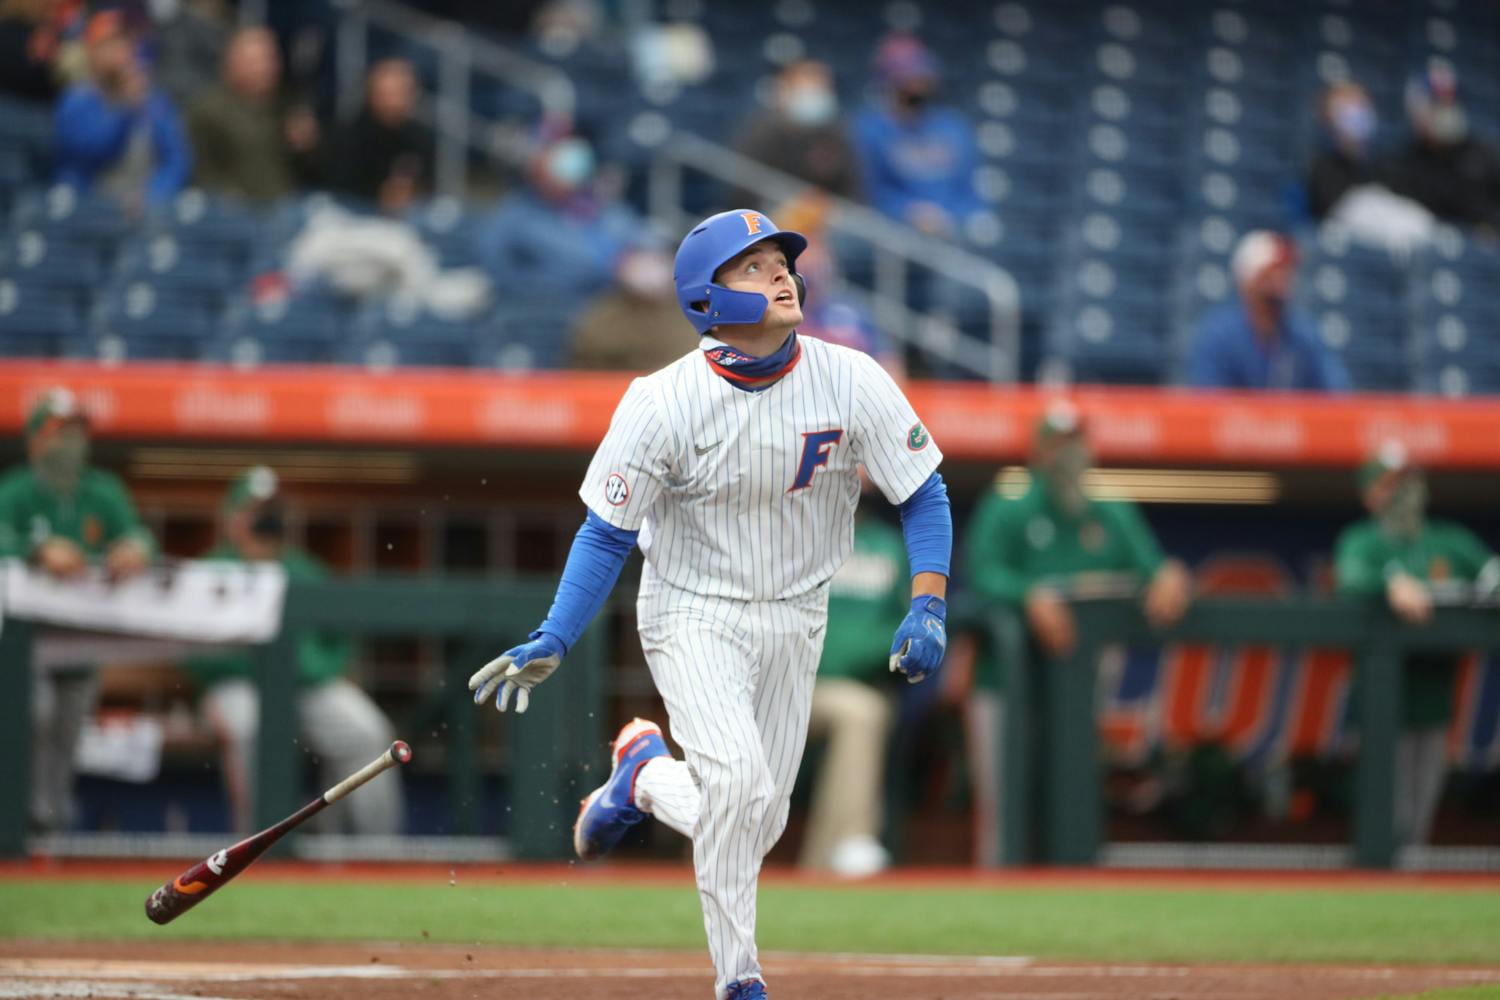 Hickey’s grand slam in the sixth opened the floodgates. Photo from UF-Miami game Feb. 19. Courtesy of the SEC Media Portal.